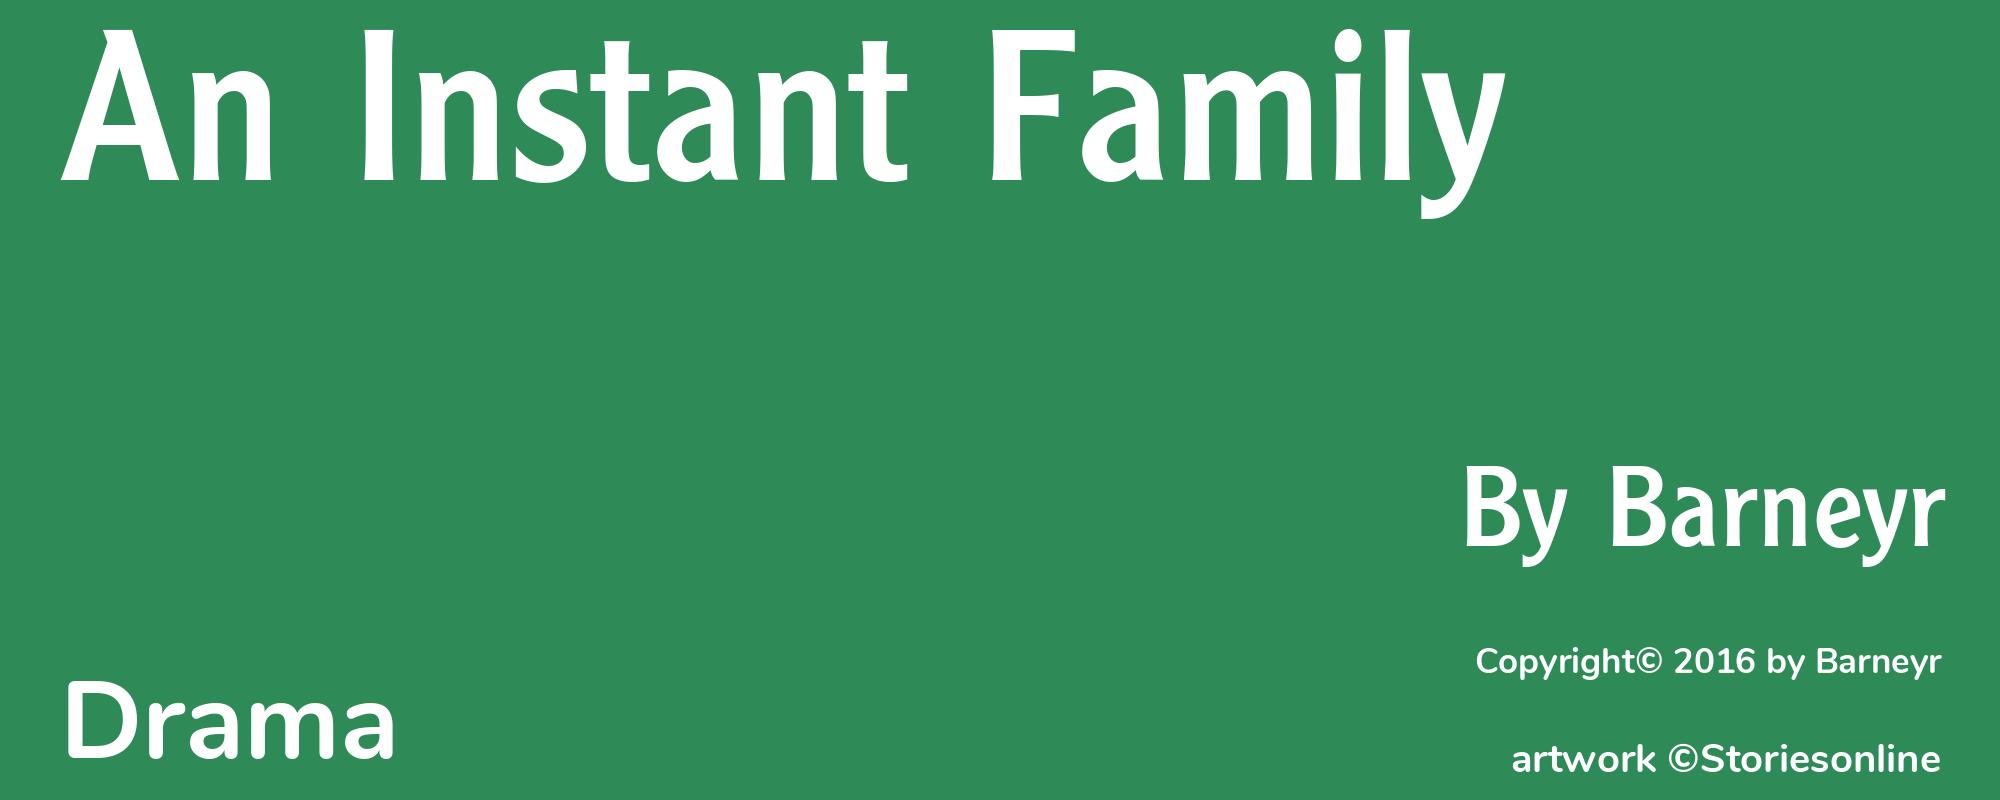 An Instant Family - Cover